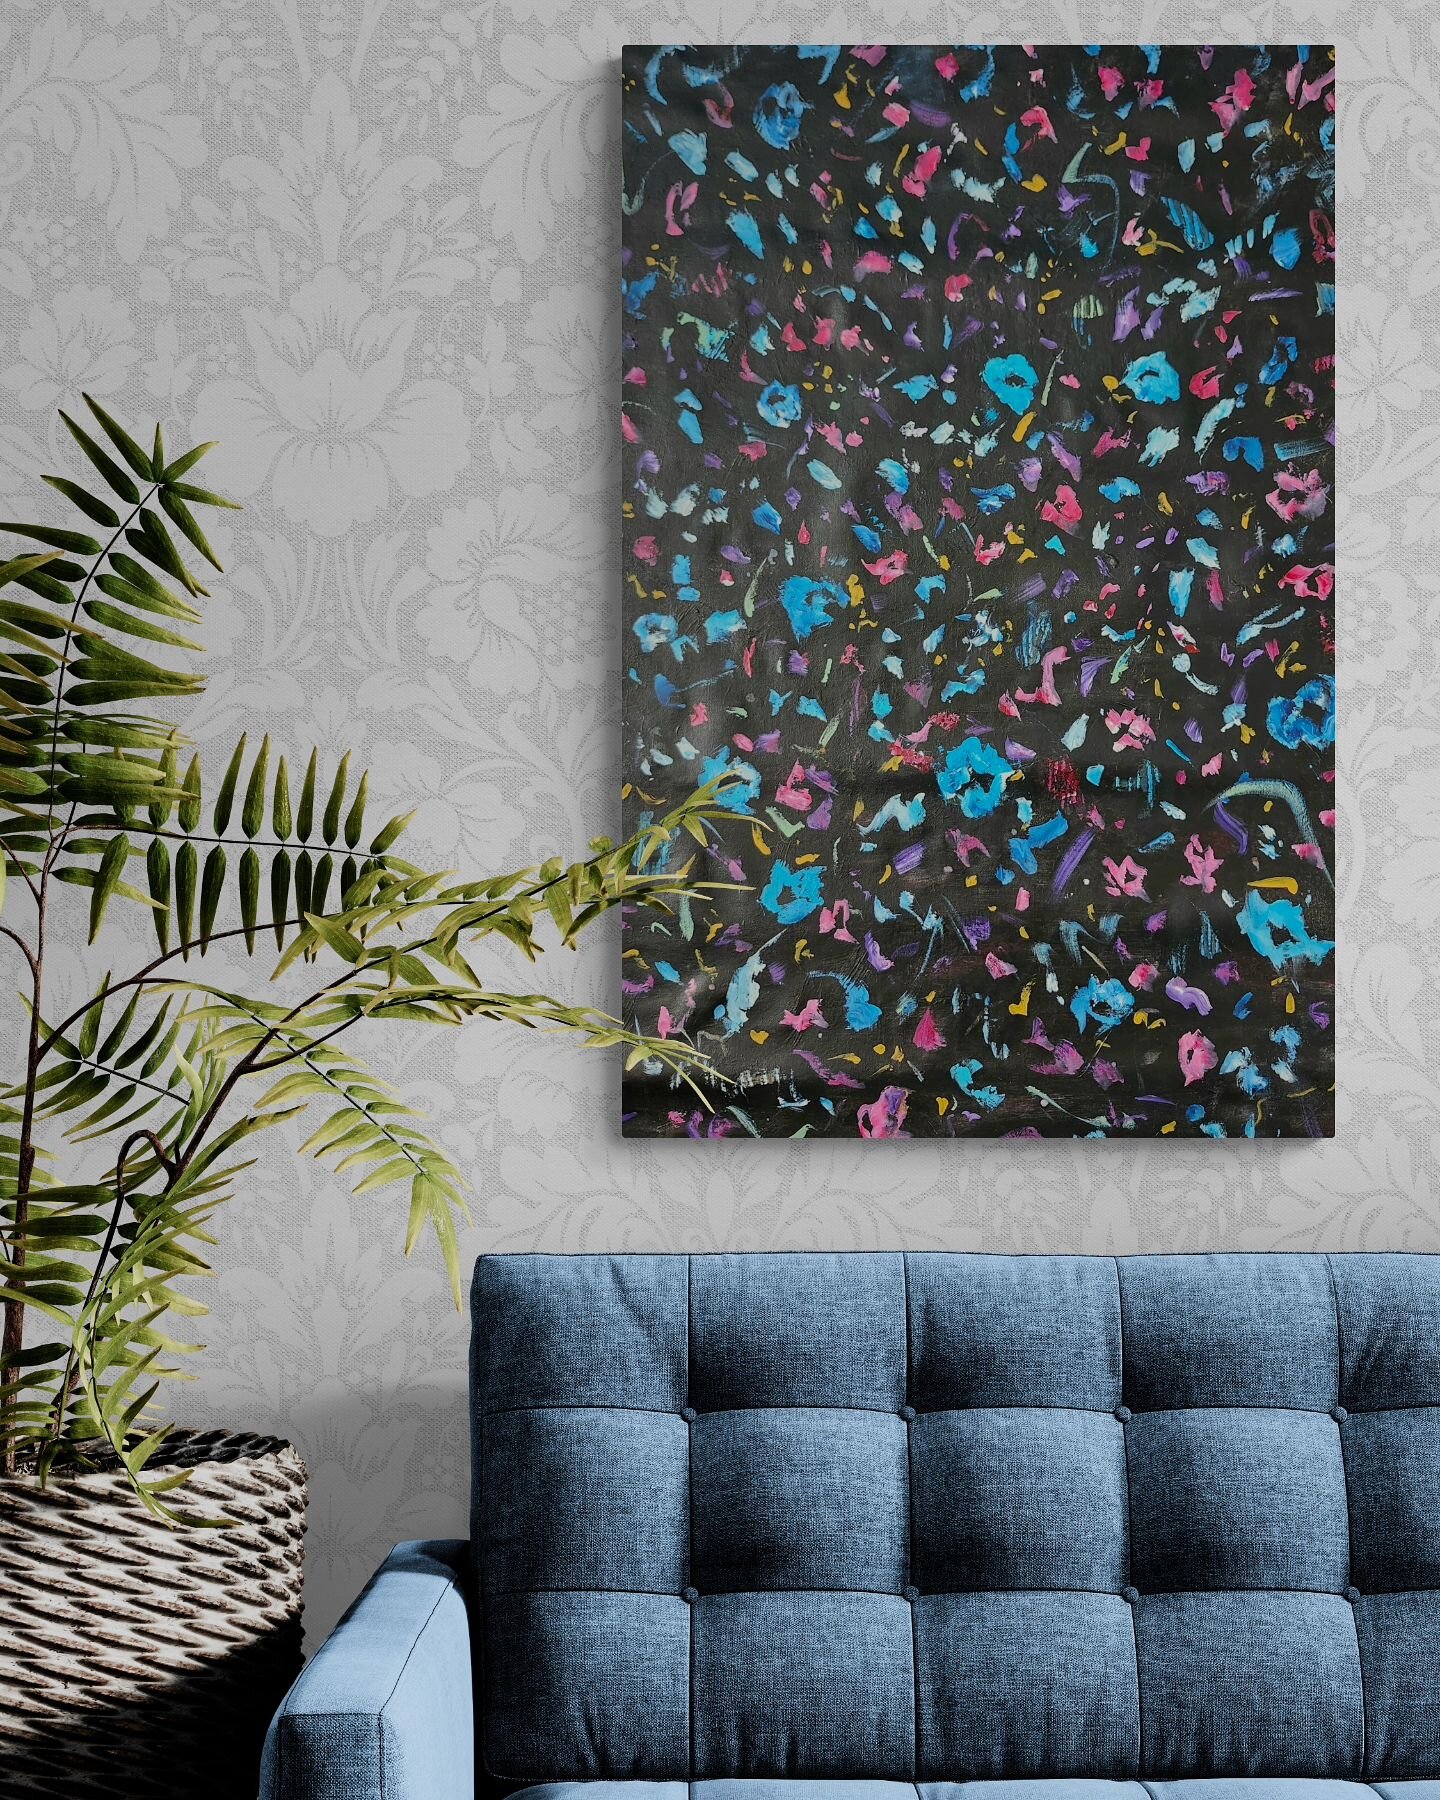 Available

Indulge in the vibrant waves of color with Rainbow Bloom. The painting is a stunning arrangement that showcases the kaleidoscope of nature's hues. The electrifying energy of pinks, blues, purples, and warm yellow contrasts against the dark